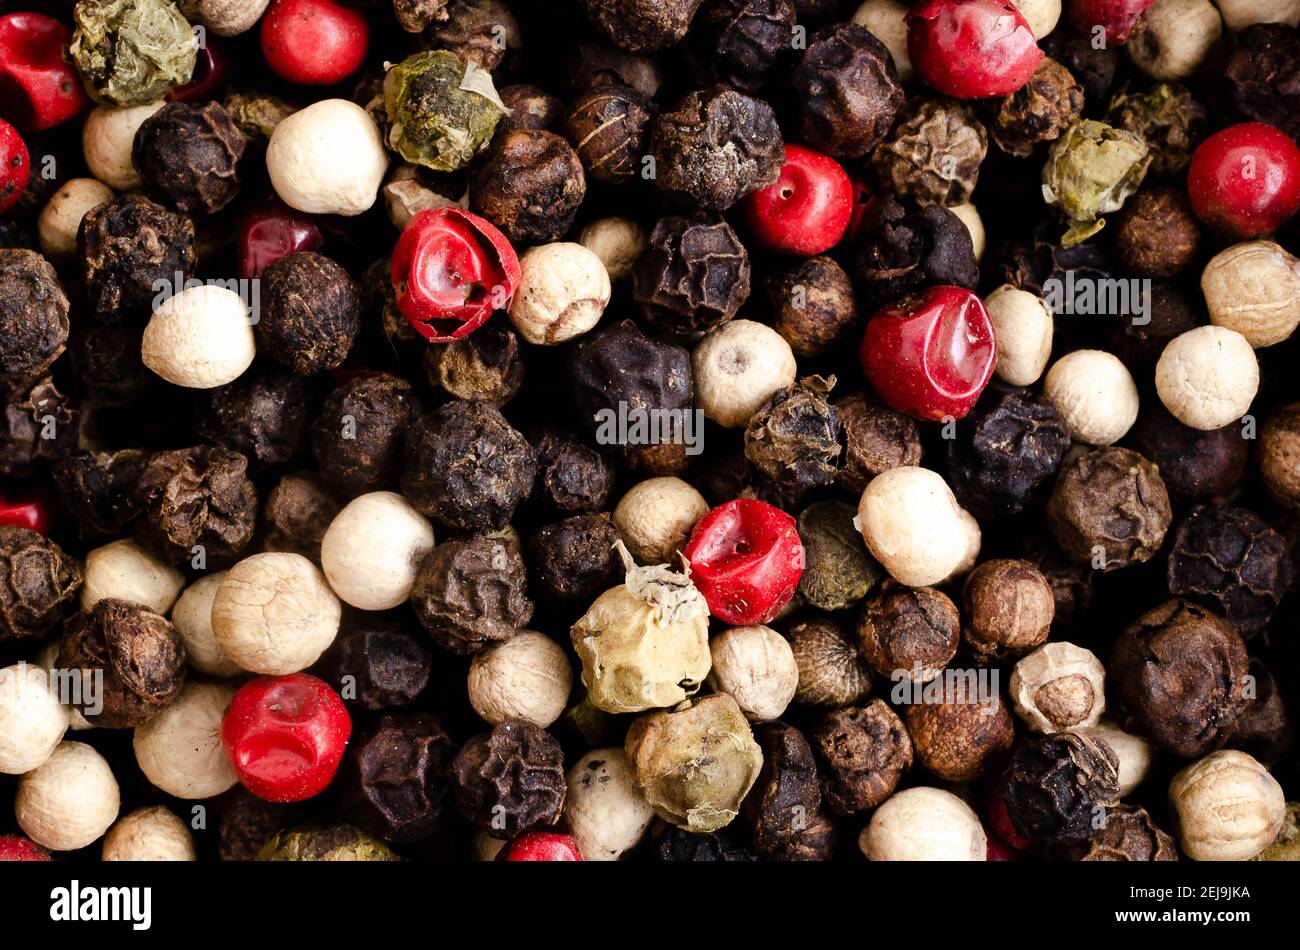 Black, white, green, and pink peppercorns. Stock Photo